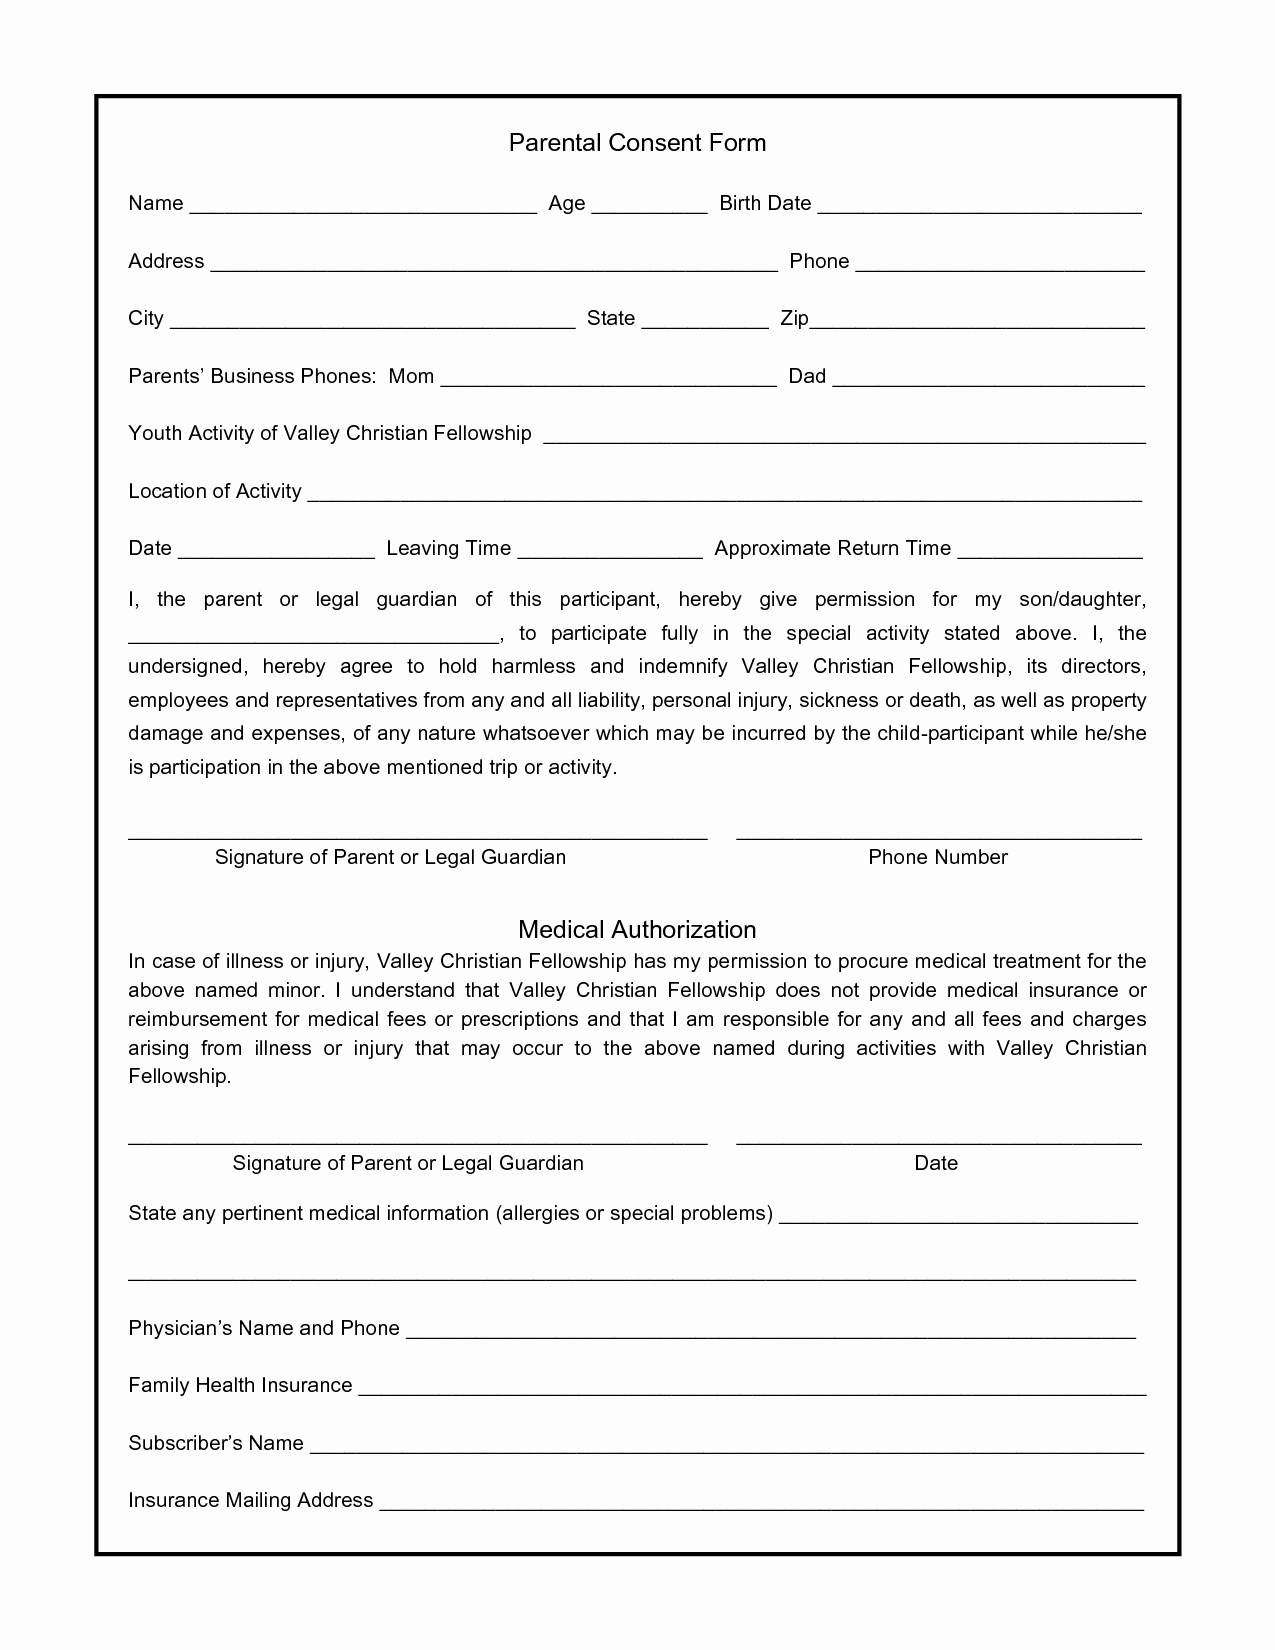 Child Travel Consent form Template New Parental Consent form for S Swifter Parental